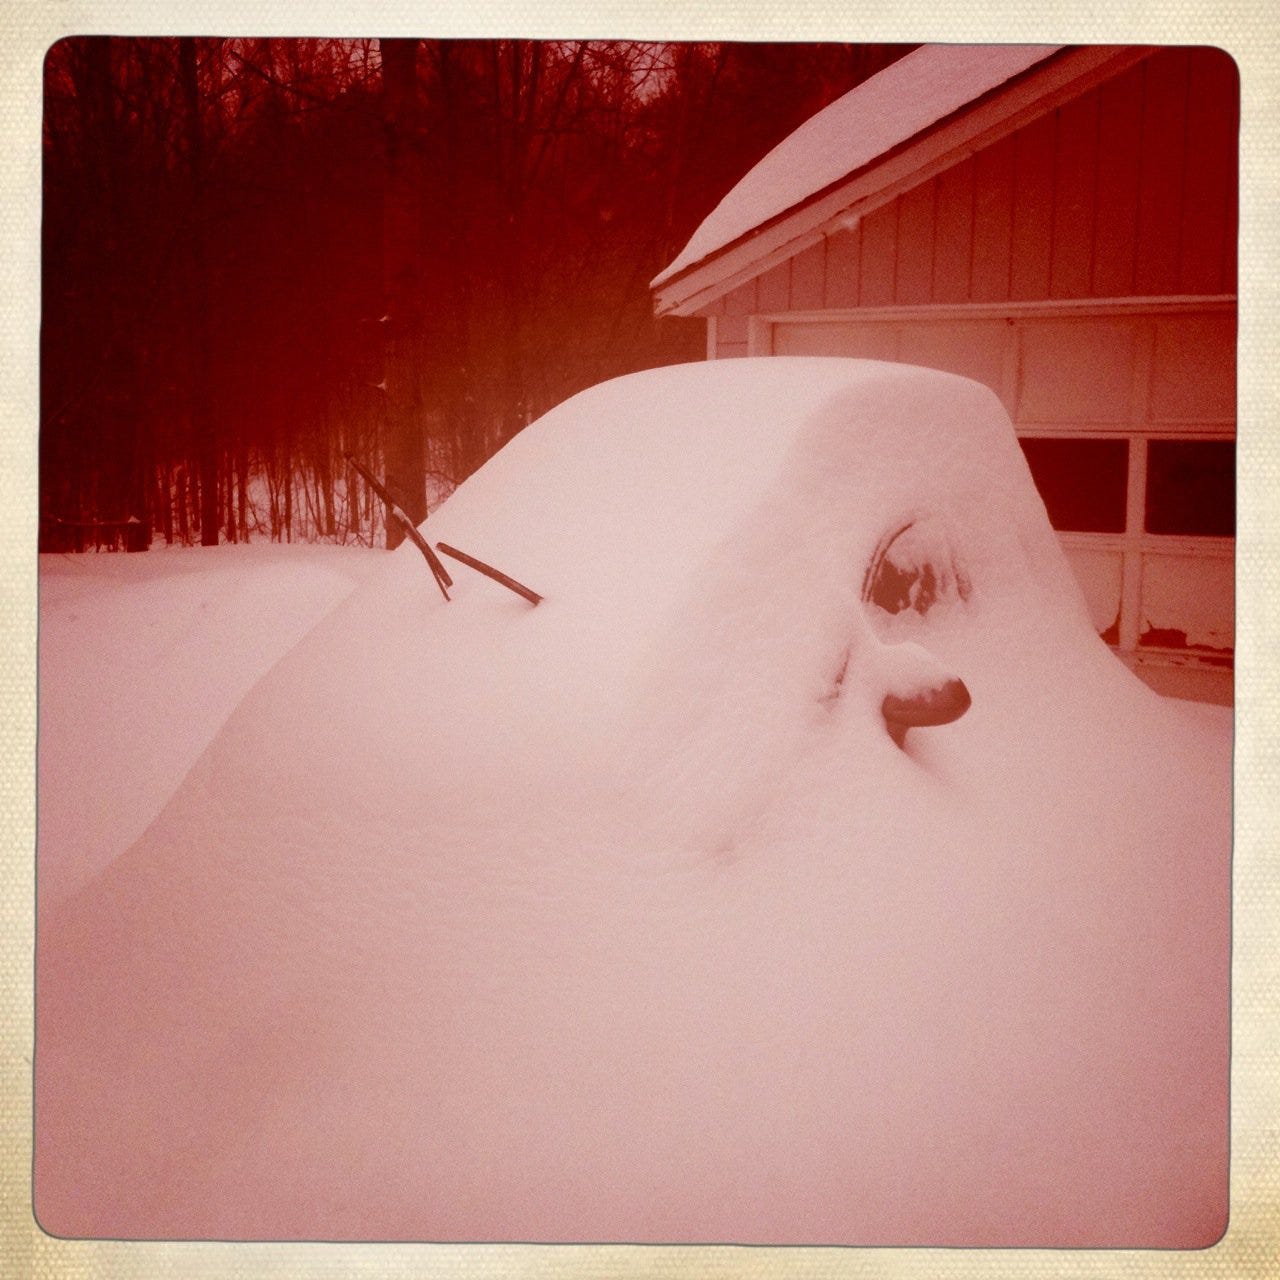 Image of a car almost completely buried in fresh snow.